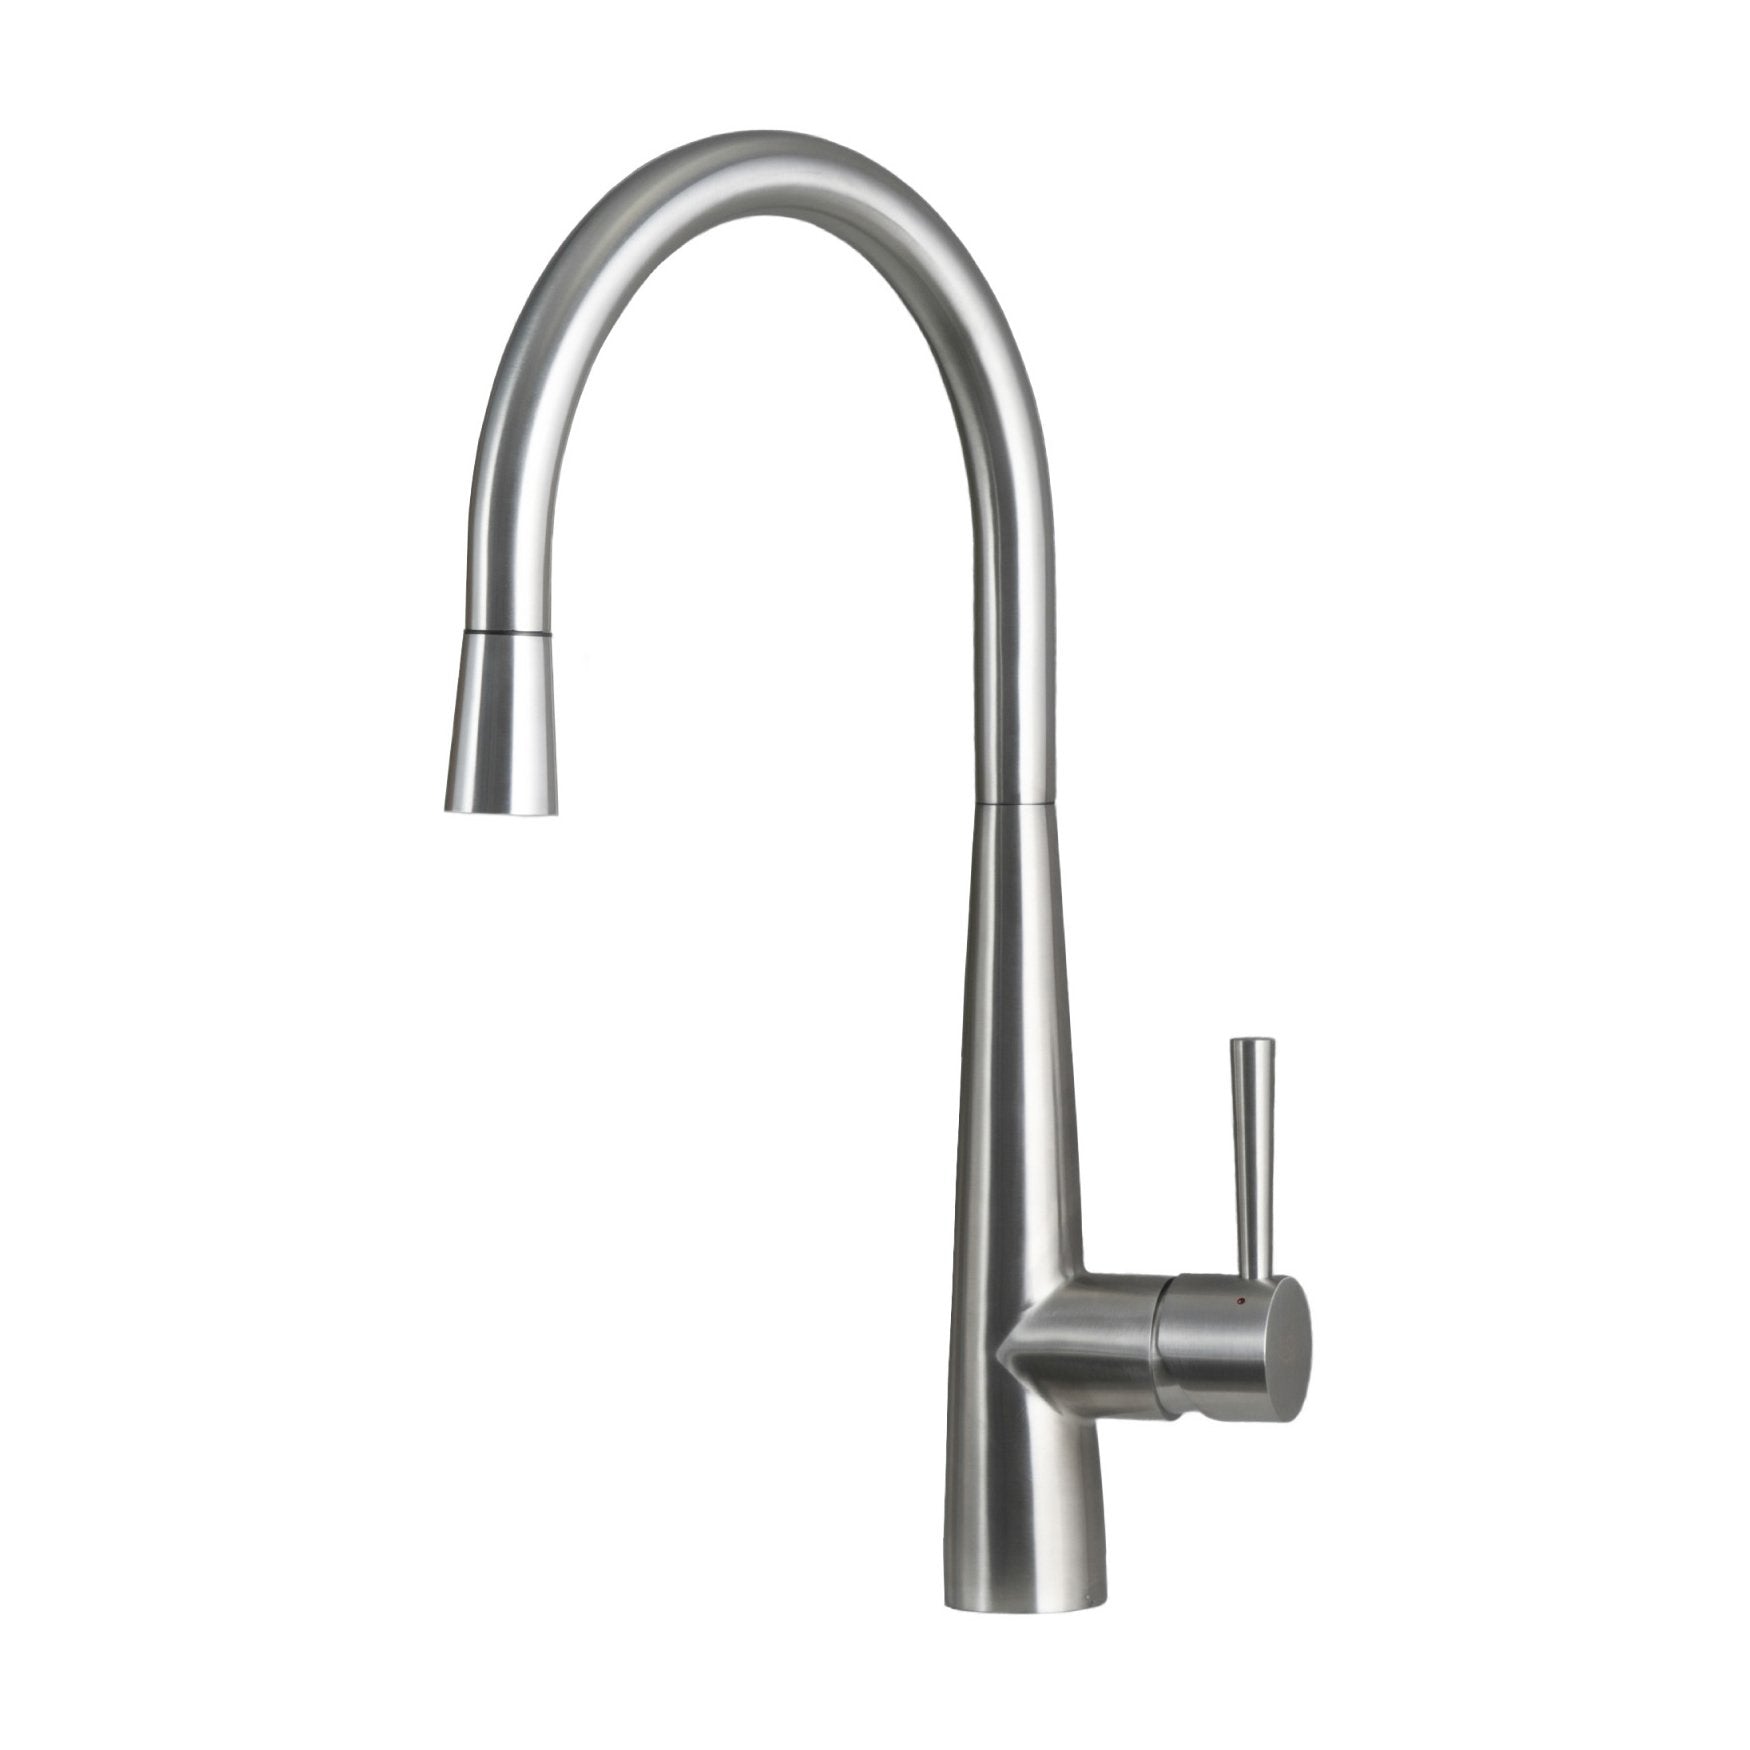 DAX Single Handle Pull Down Kitchen Faucet, Stainless Steel Shower Head and Body, Brushed Finish, Size 9 x 17-9/16 Inches (DAX-S1087P)